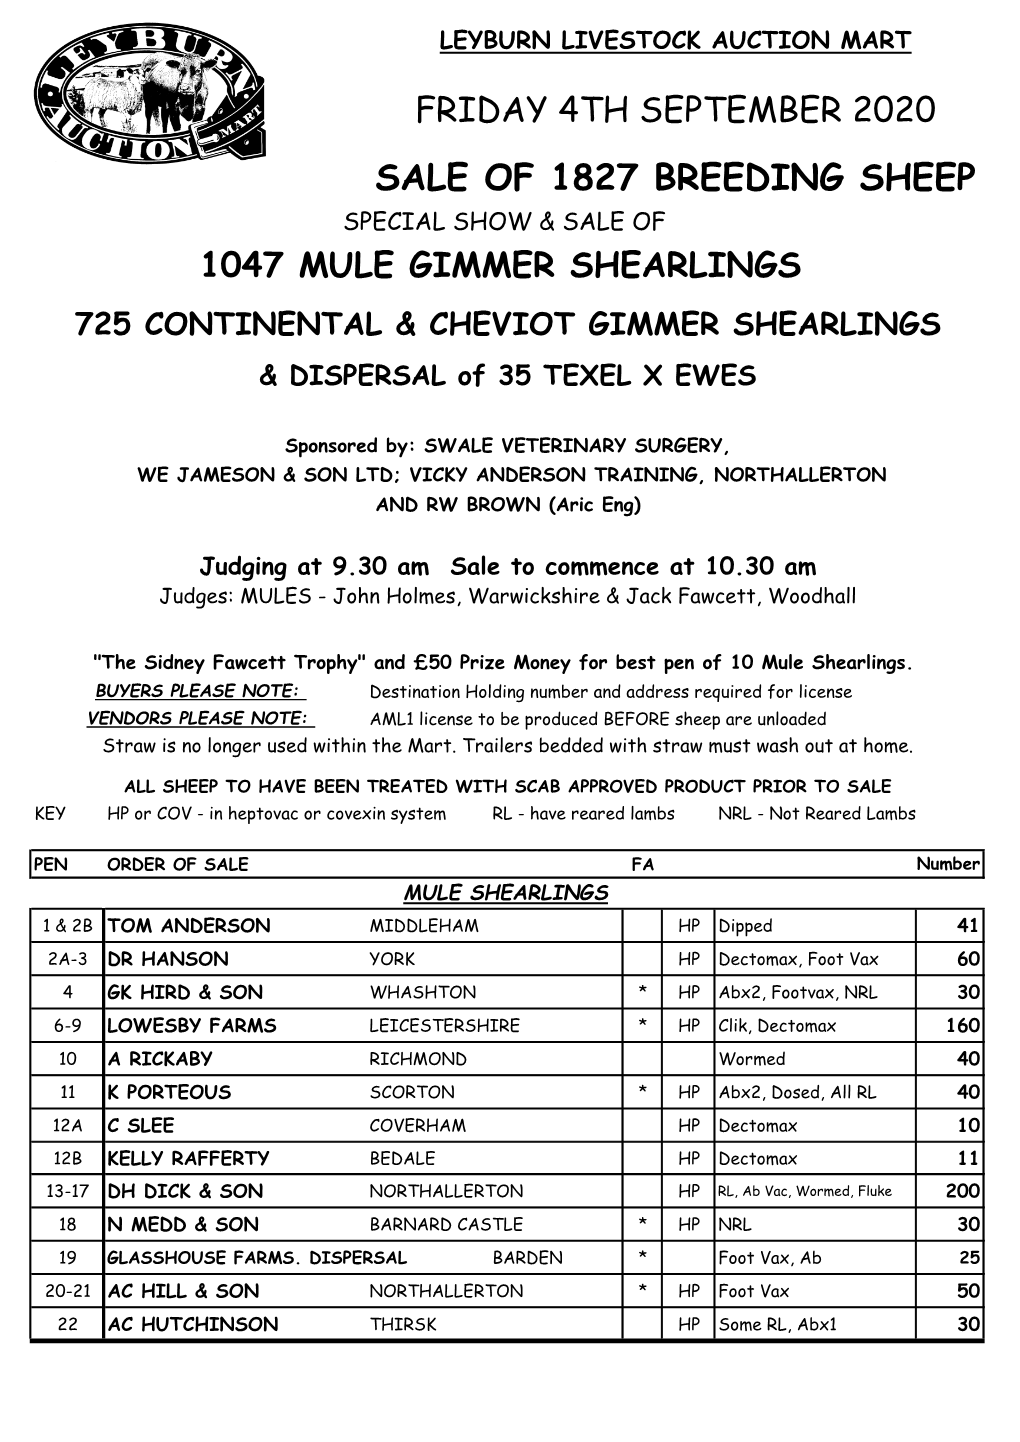 SALE of 1827 BREEDING SHEEP SPECIAL SHOW & SALE of 1047 MULE GIMMER SHEARLINGS 725 CONTINENTAL & CHEVIOT GIMMER SHEARLINGS & DISPERSAL of 35 TEXEL X EWES